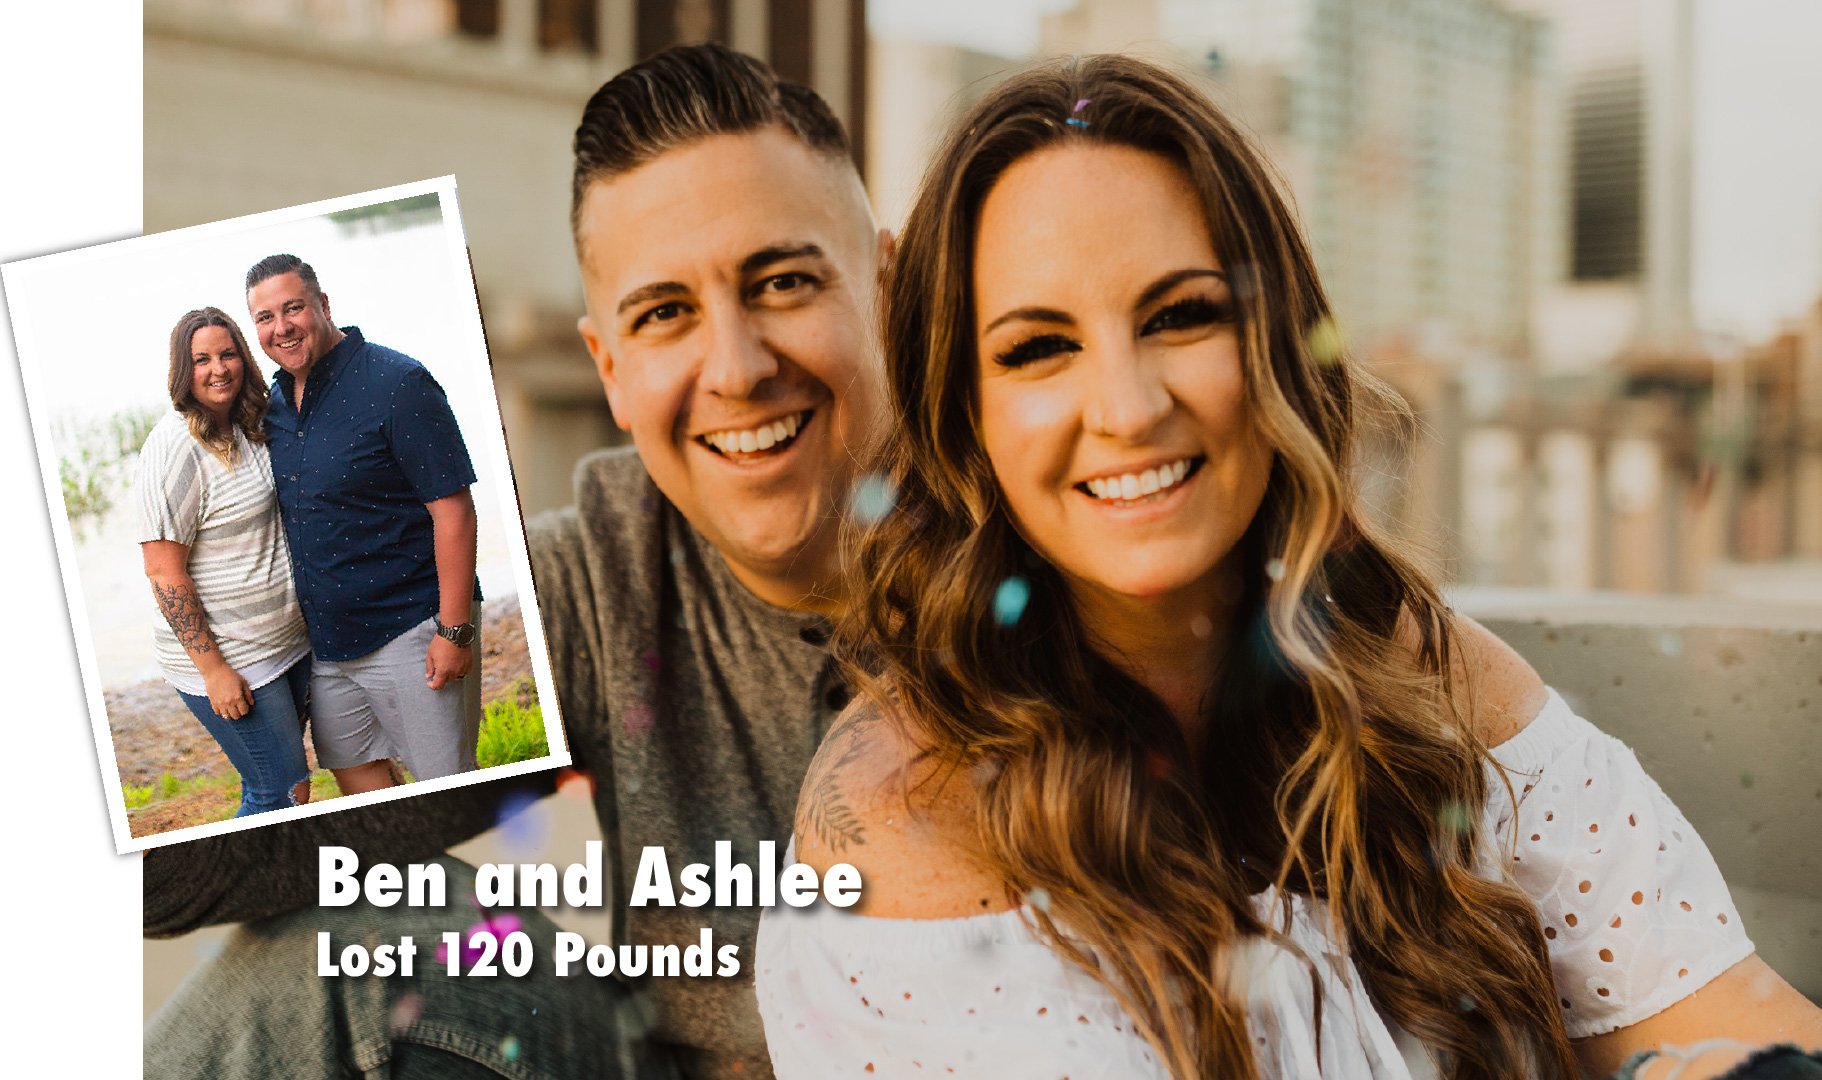 Ben and Ashlee lost 120 Pounds with Profile Plan